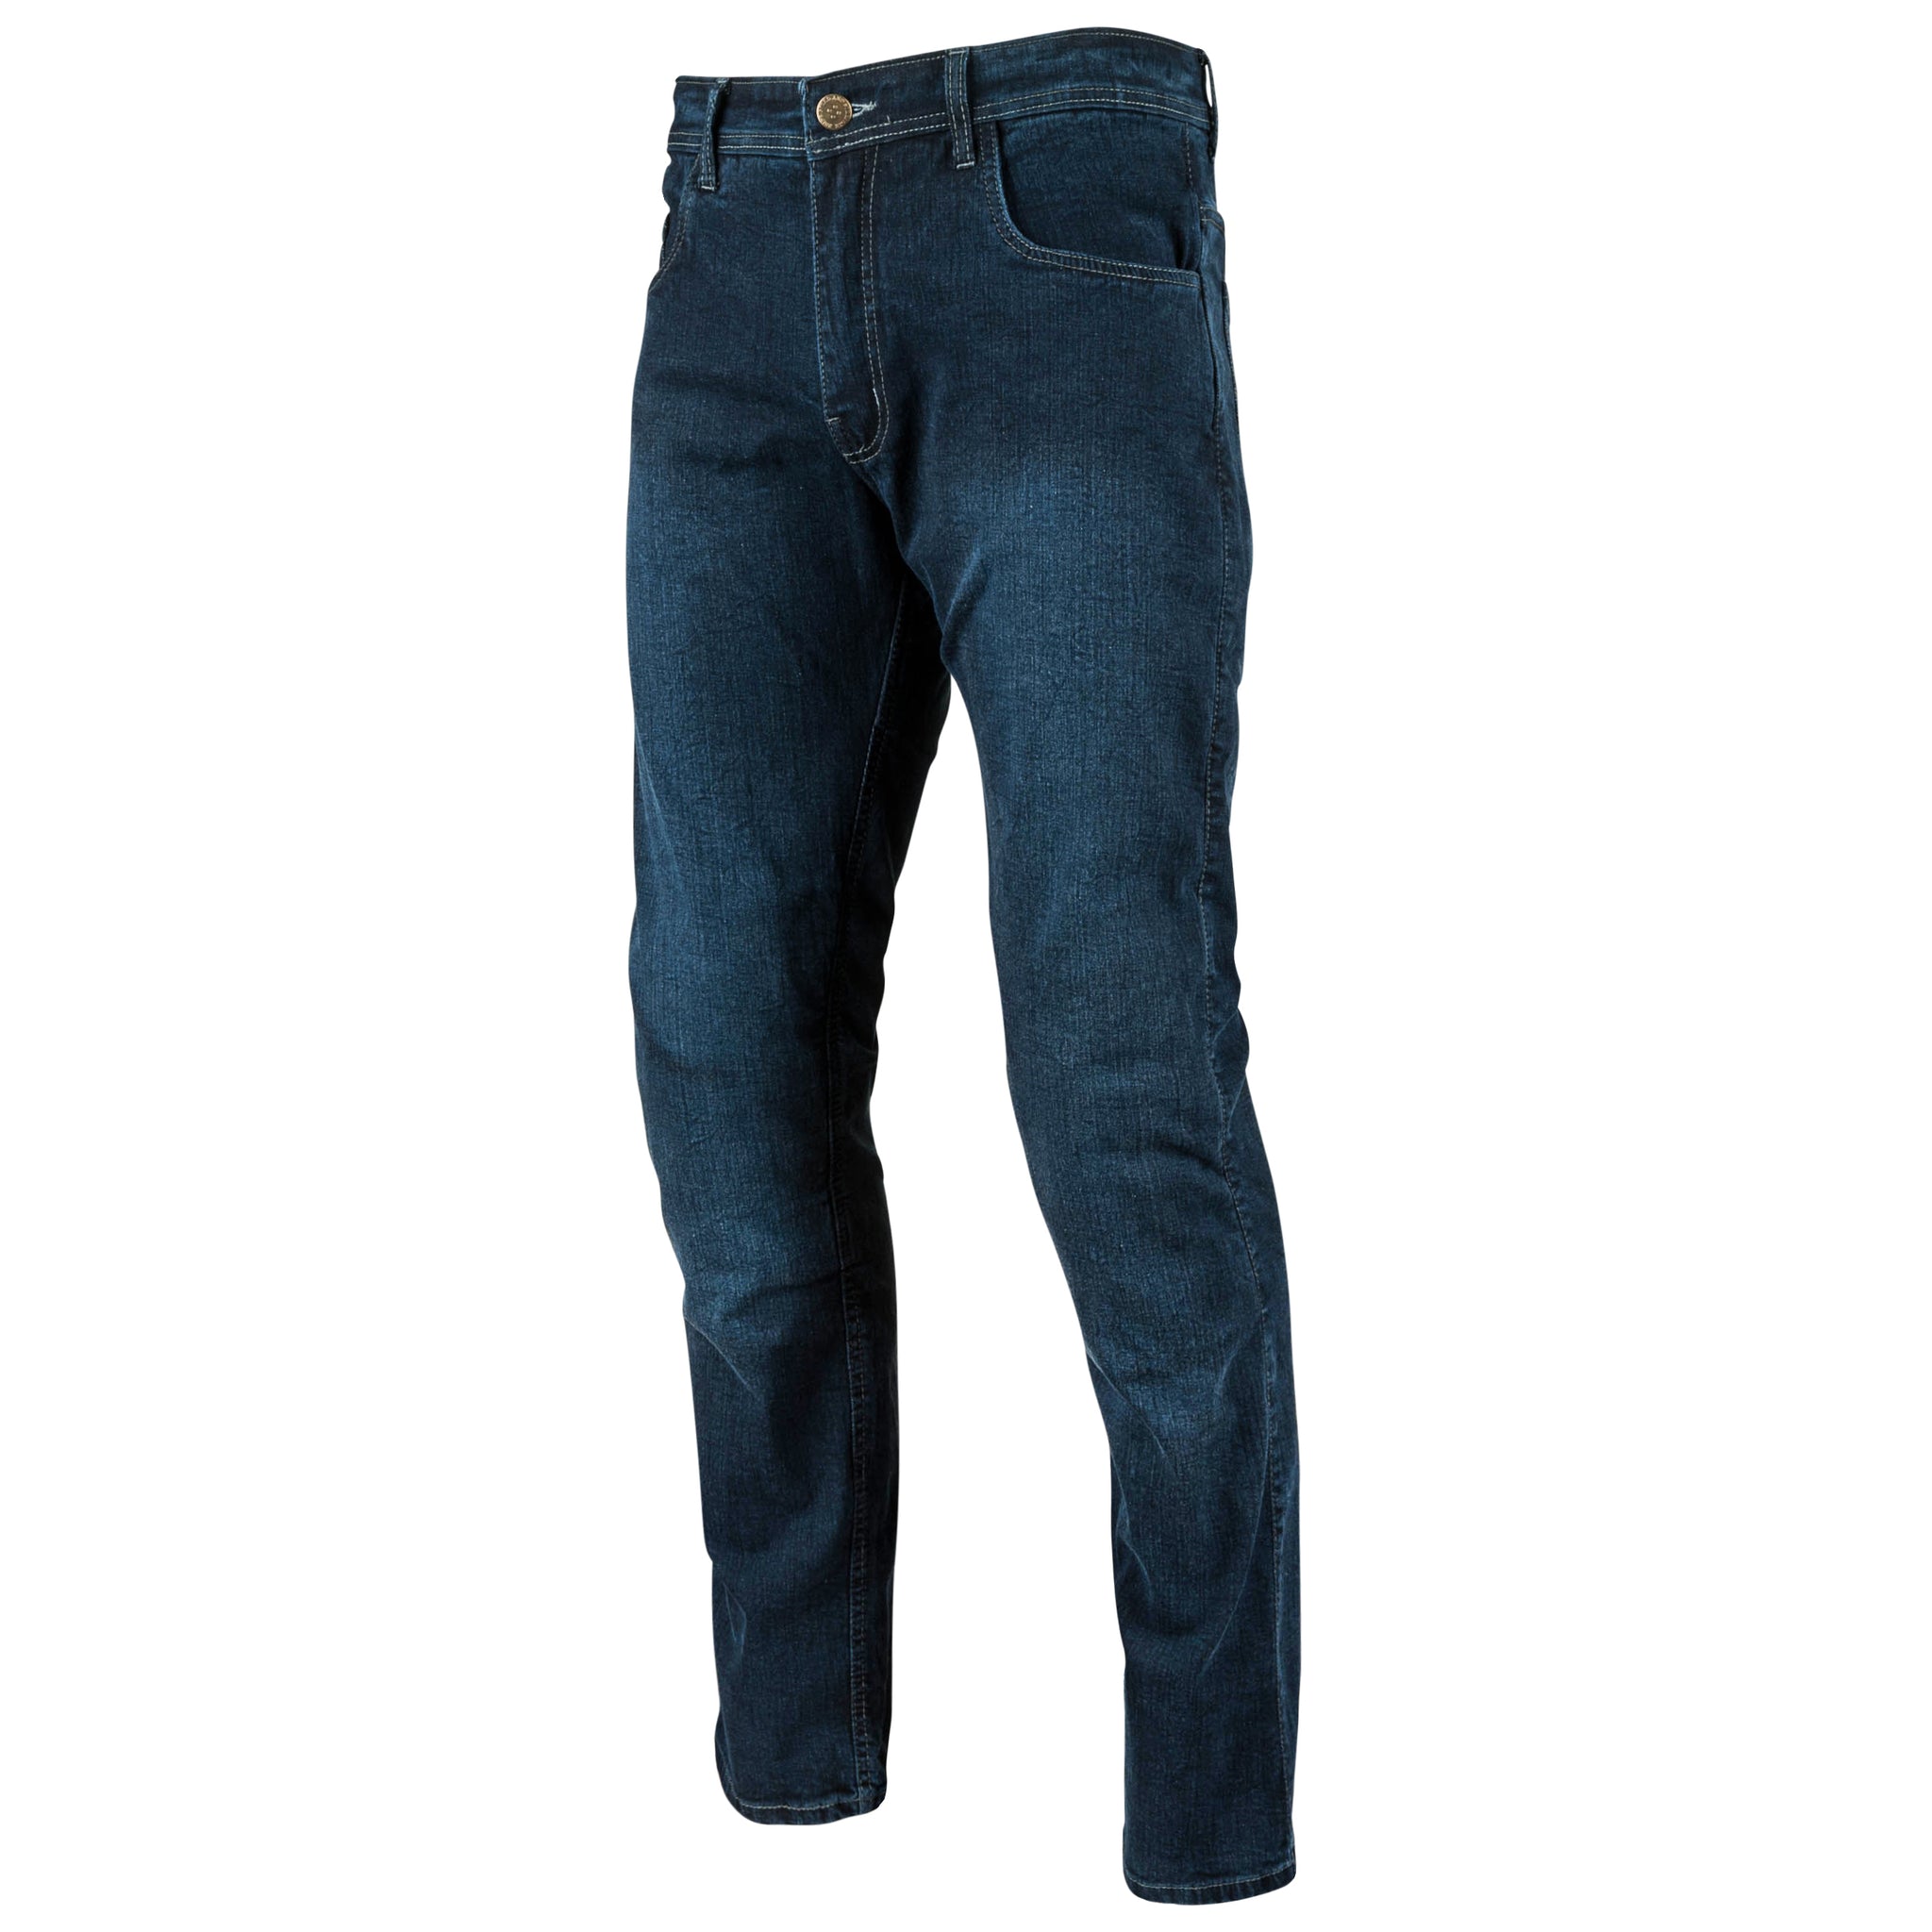 Women's Motorcycle Jeans  Comet Stretch Jeans in Midnight